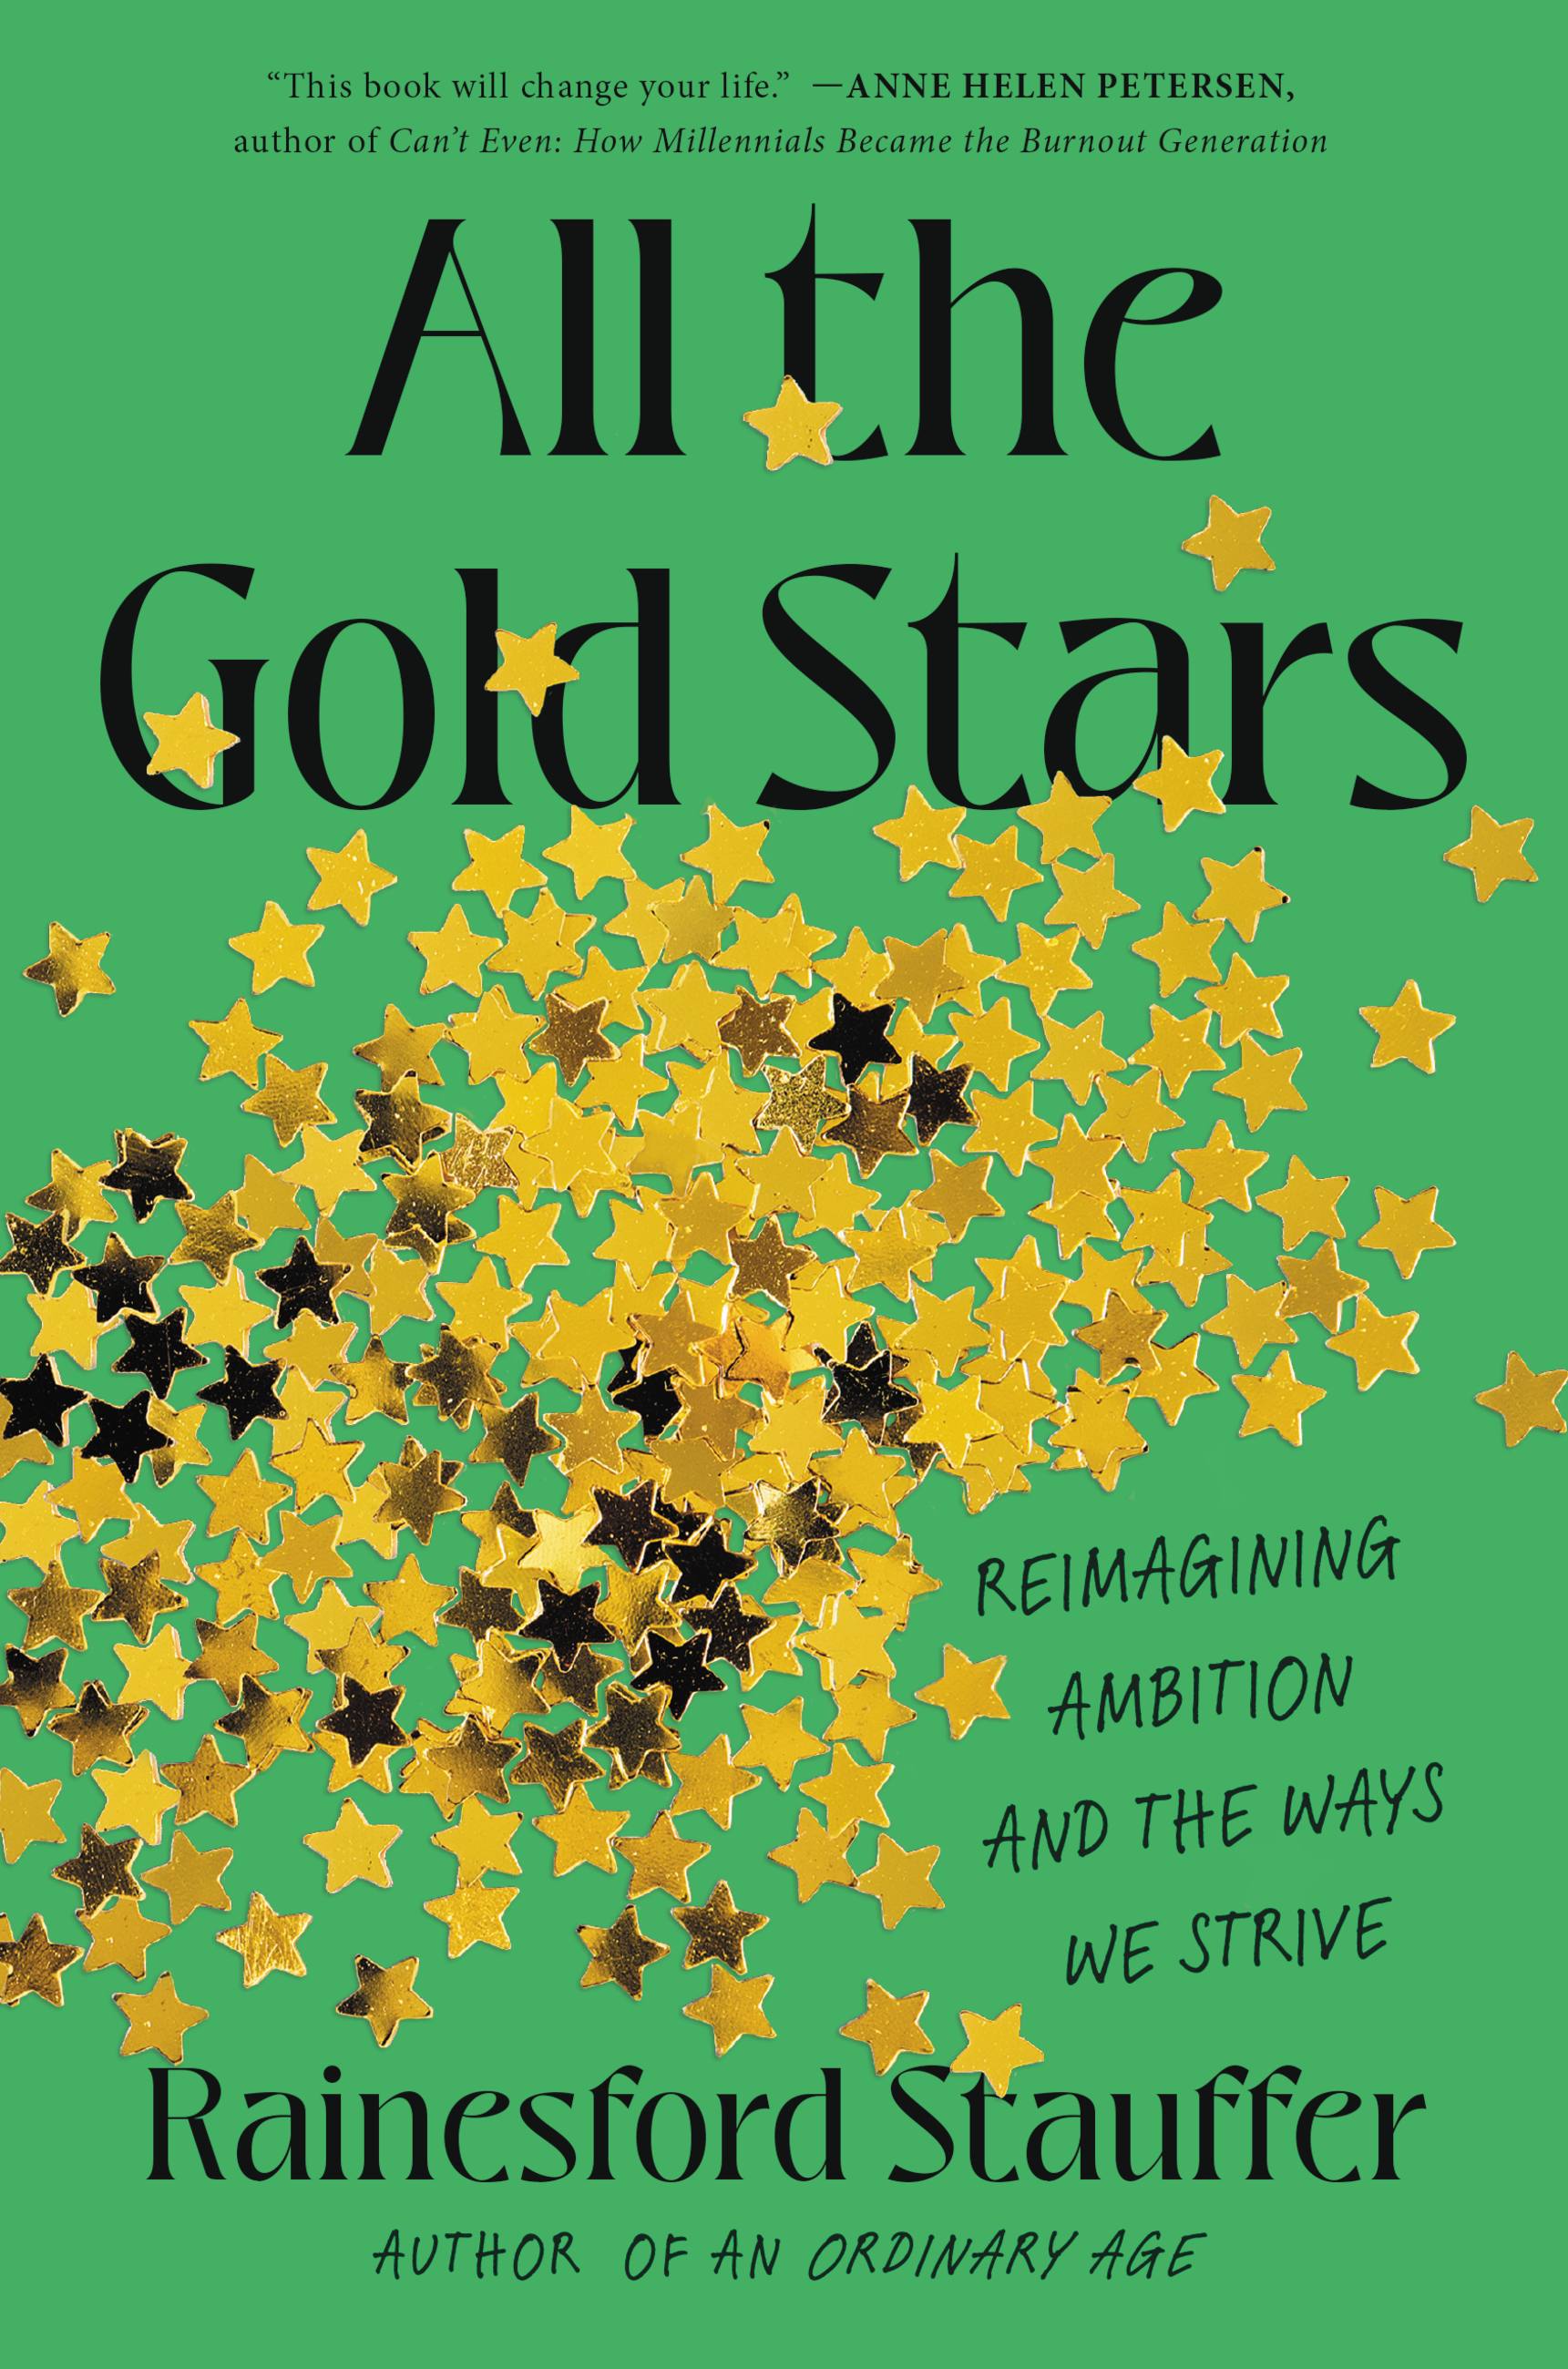 All the Gold Stars by Rainesford Stauffer